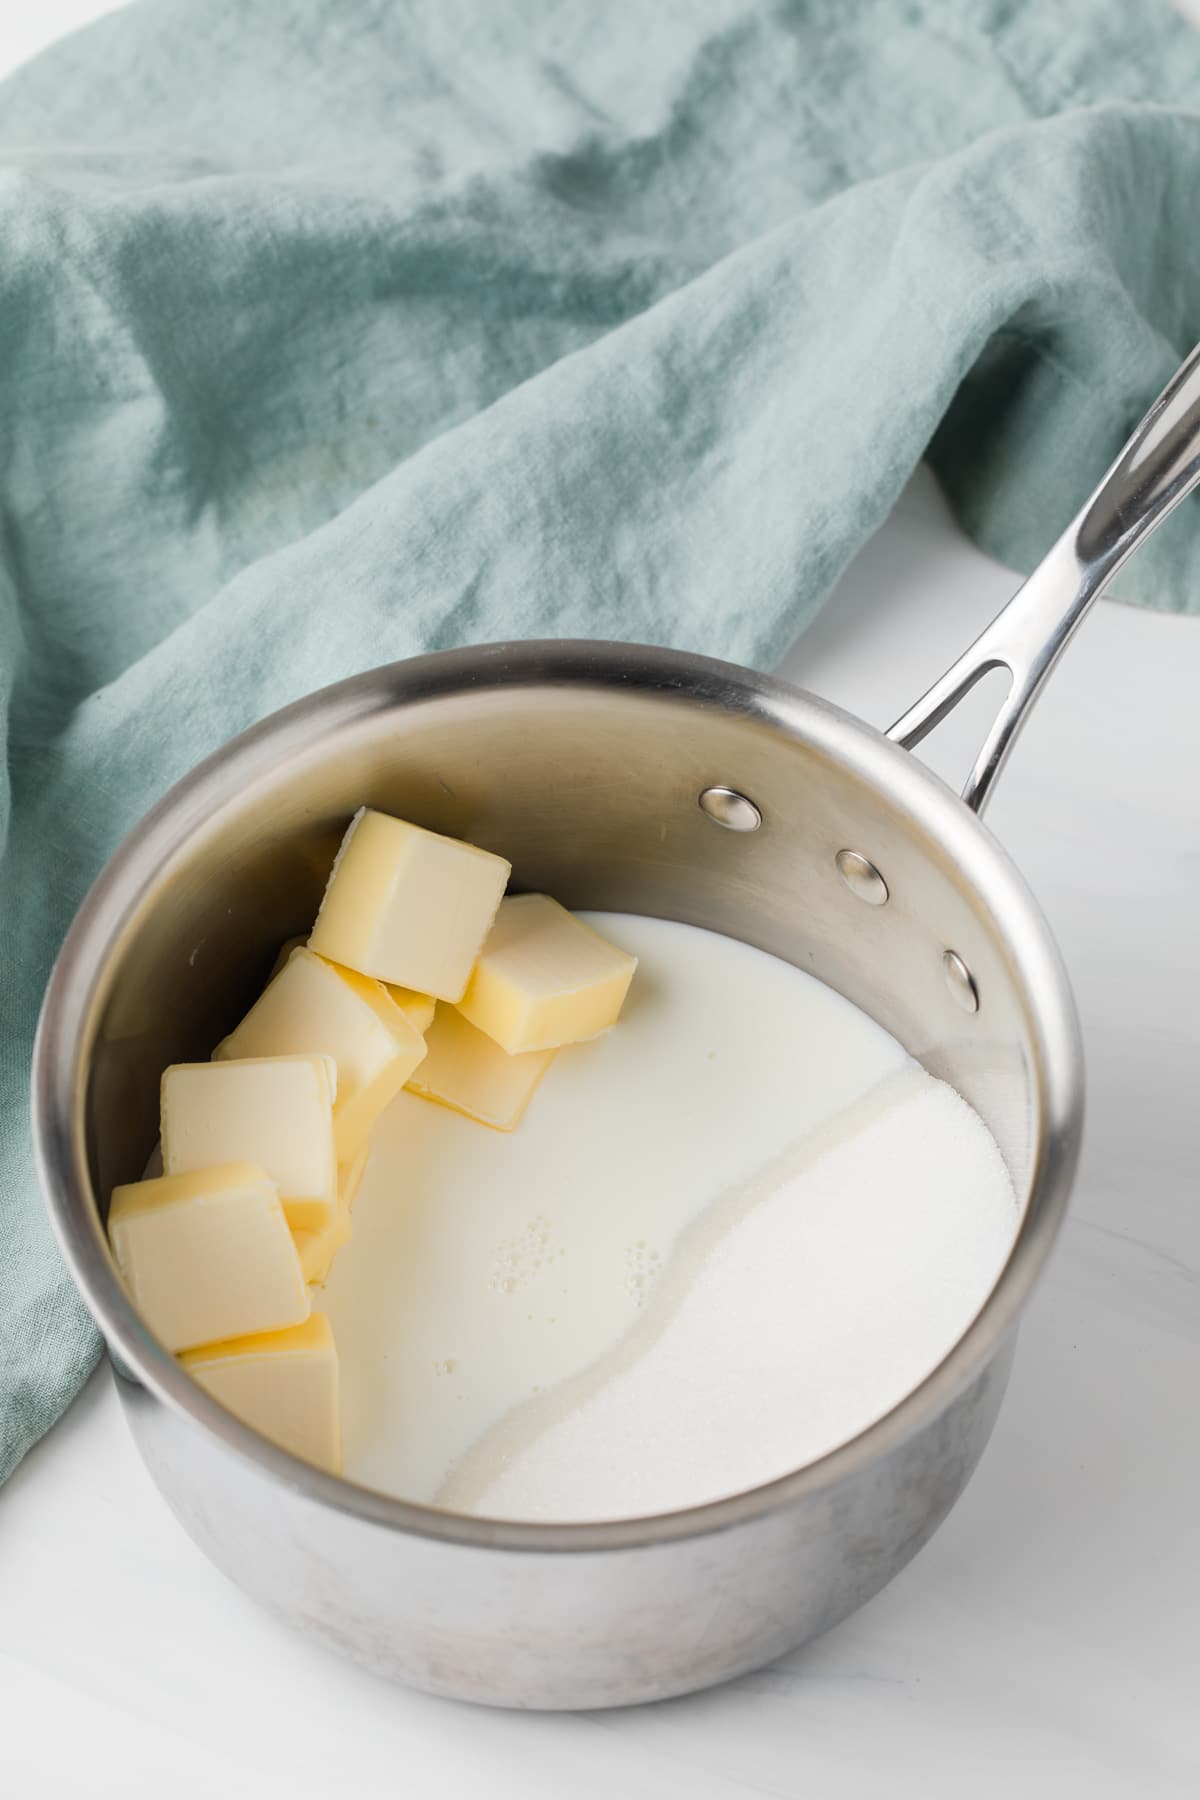 butter, sugar, and milk in stainless steel pot with light blue-green cloth next to it